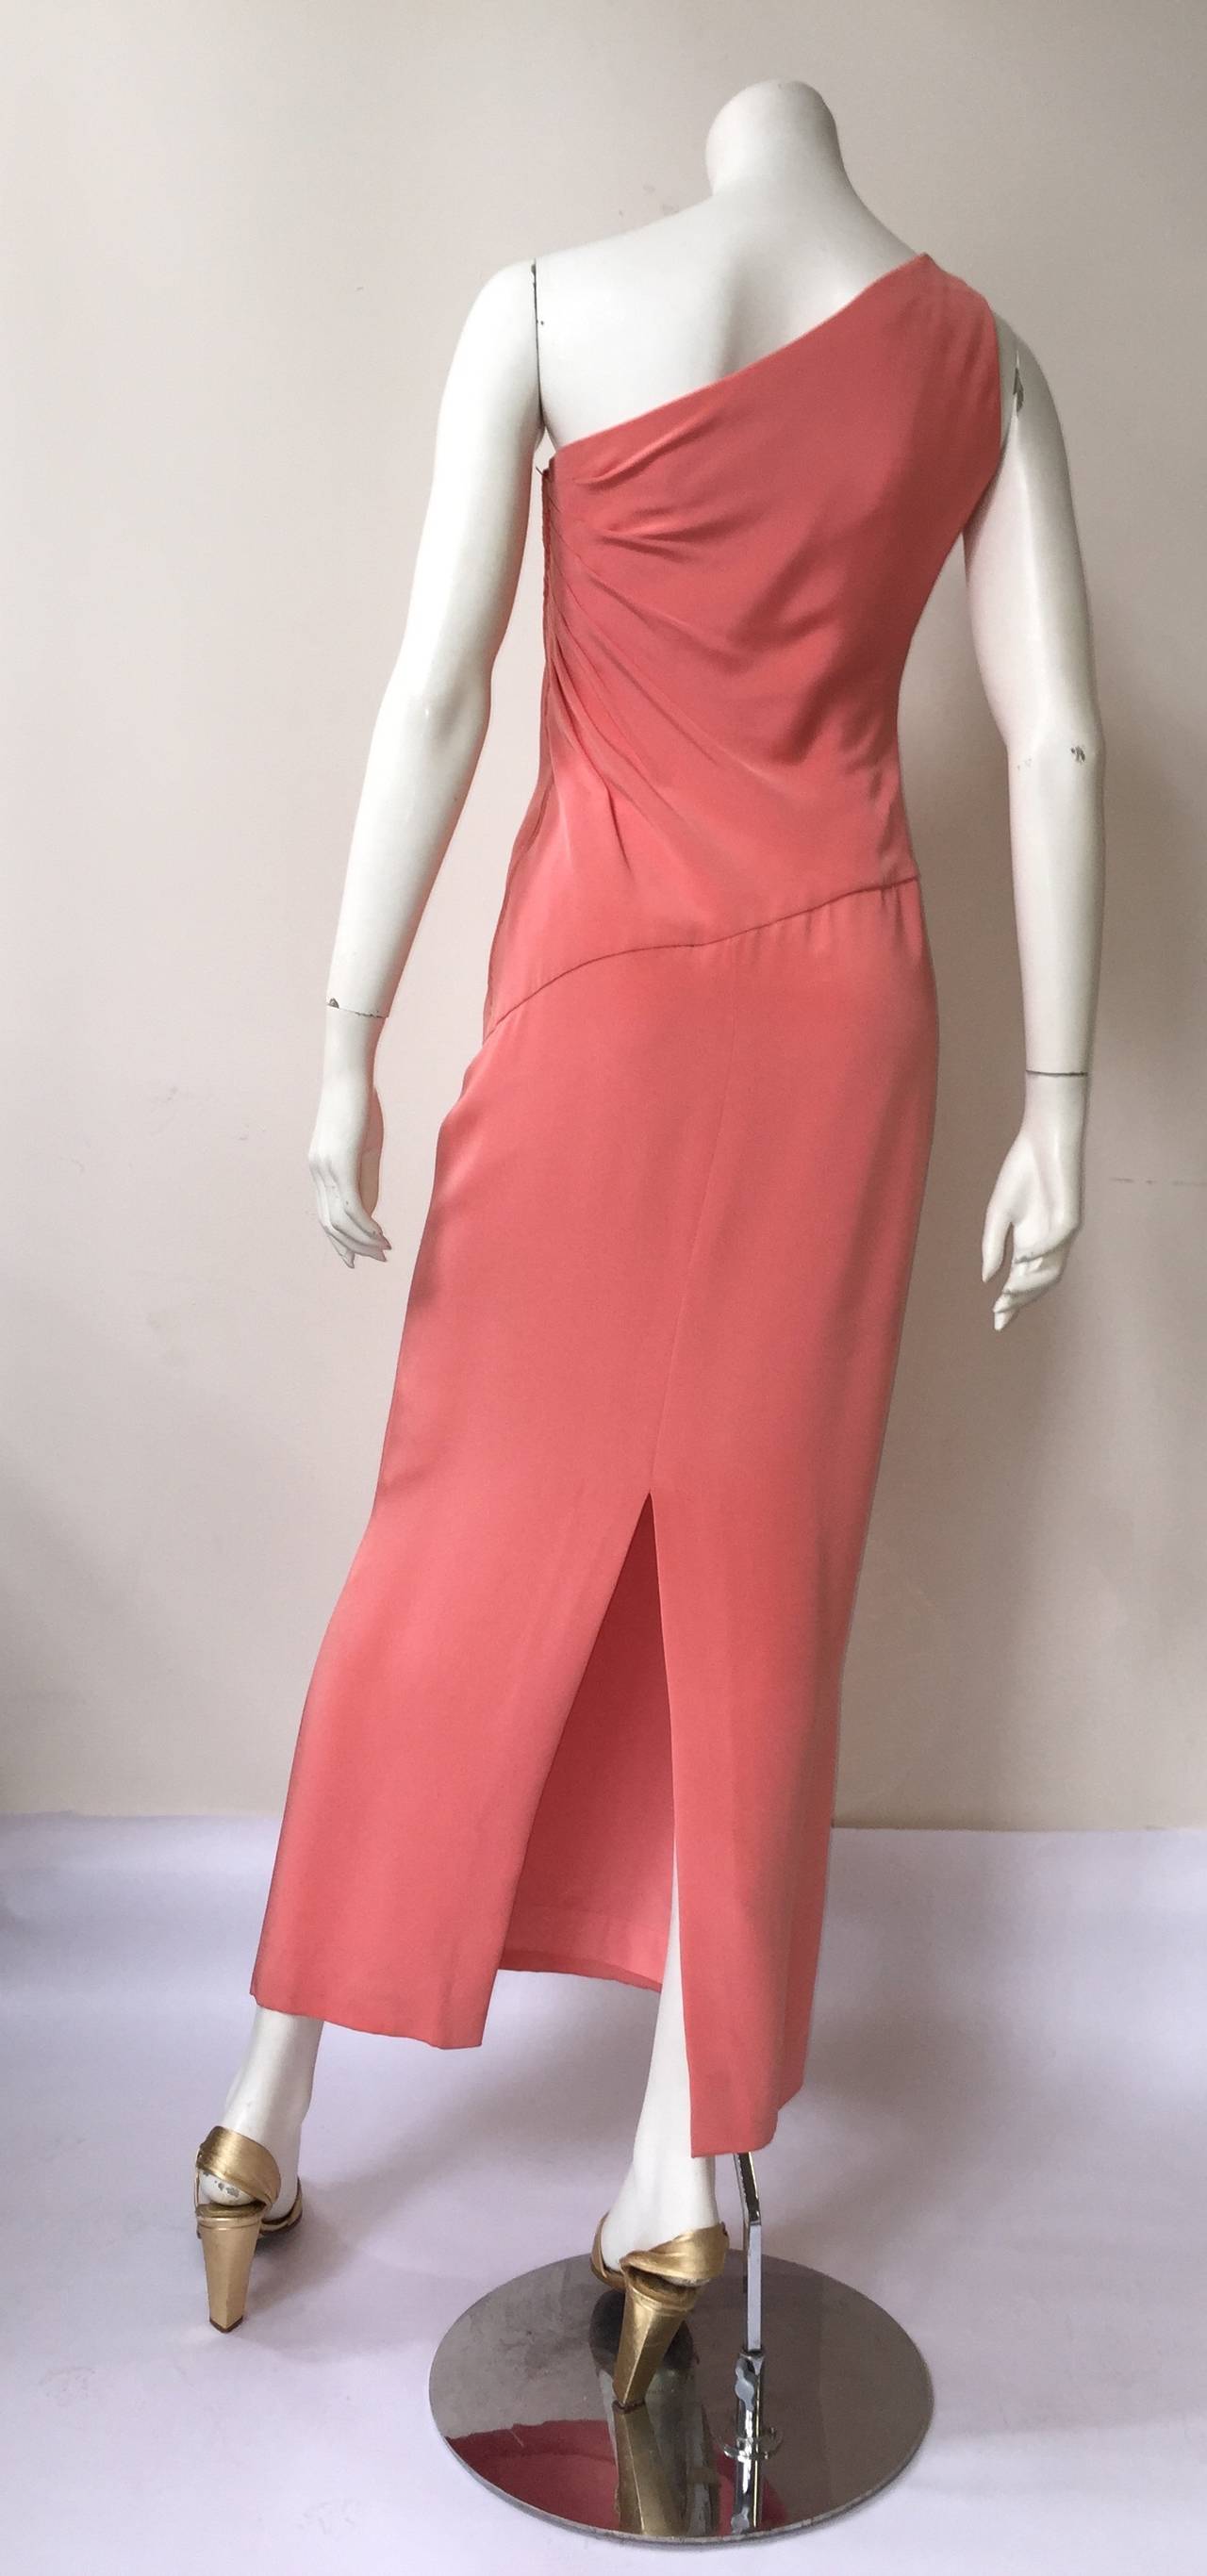 Women's Carolyne Roehm for Sak's Fifth Avenue 1980s Coral Gown Size 6. For Sale